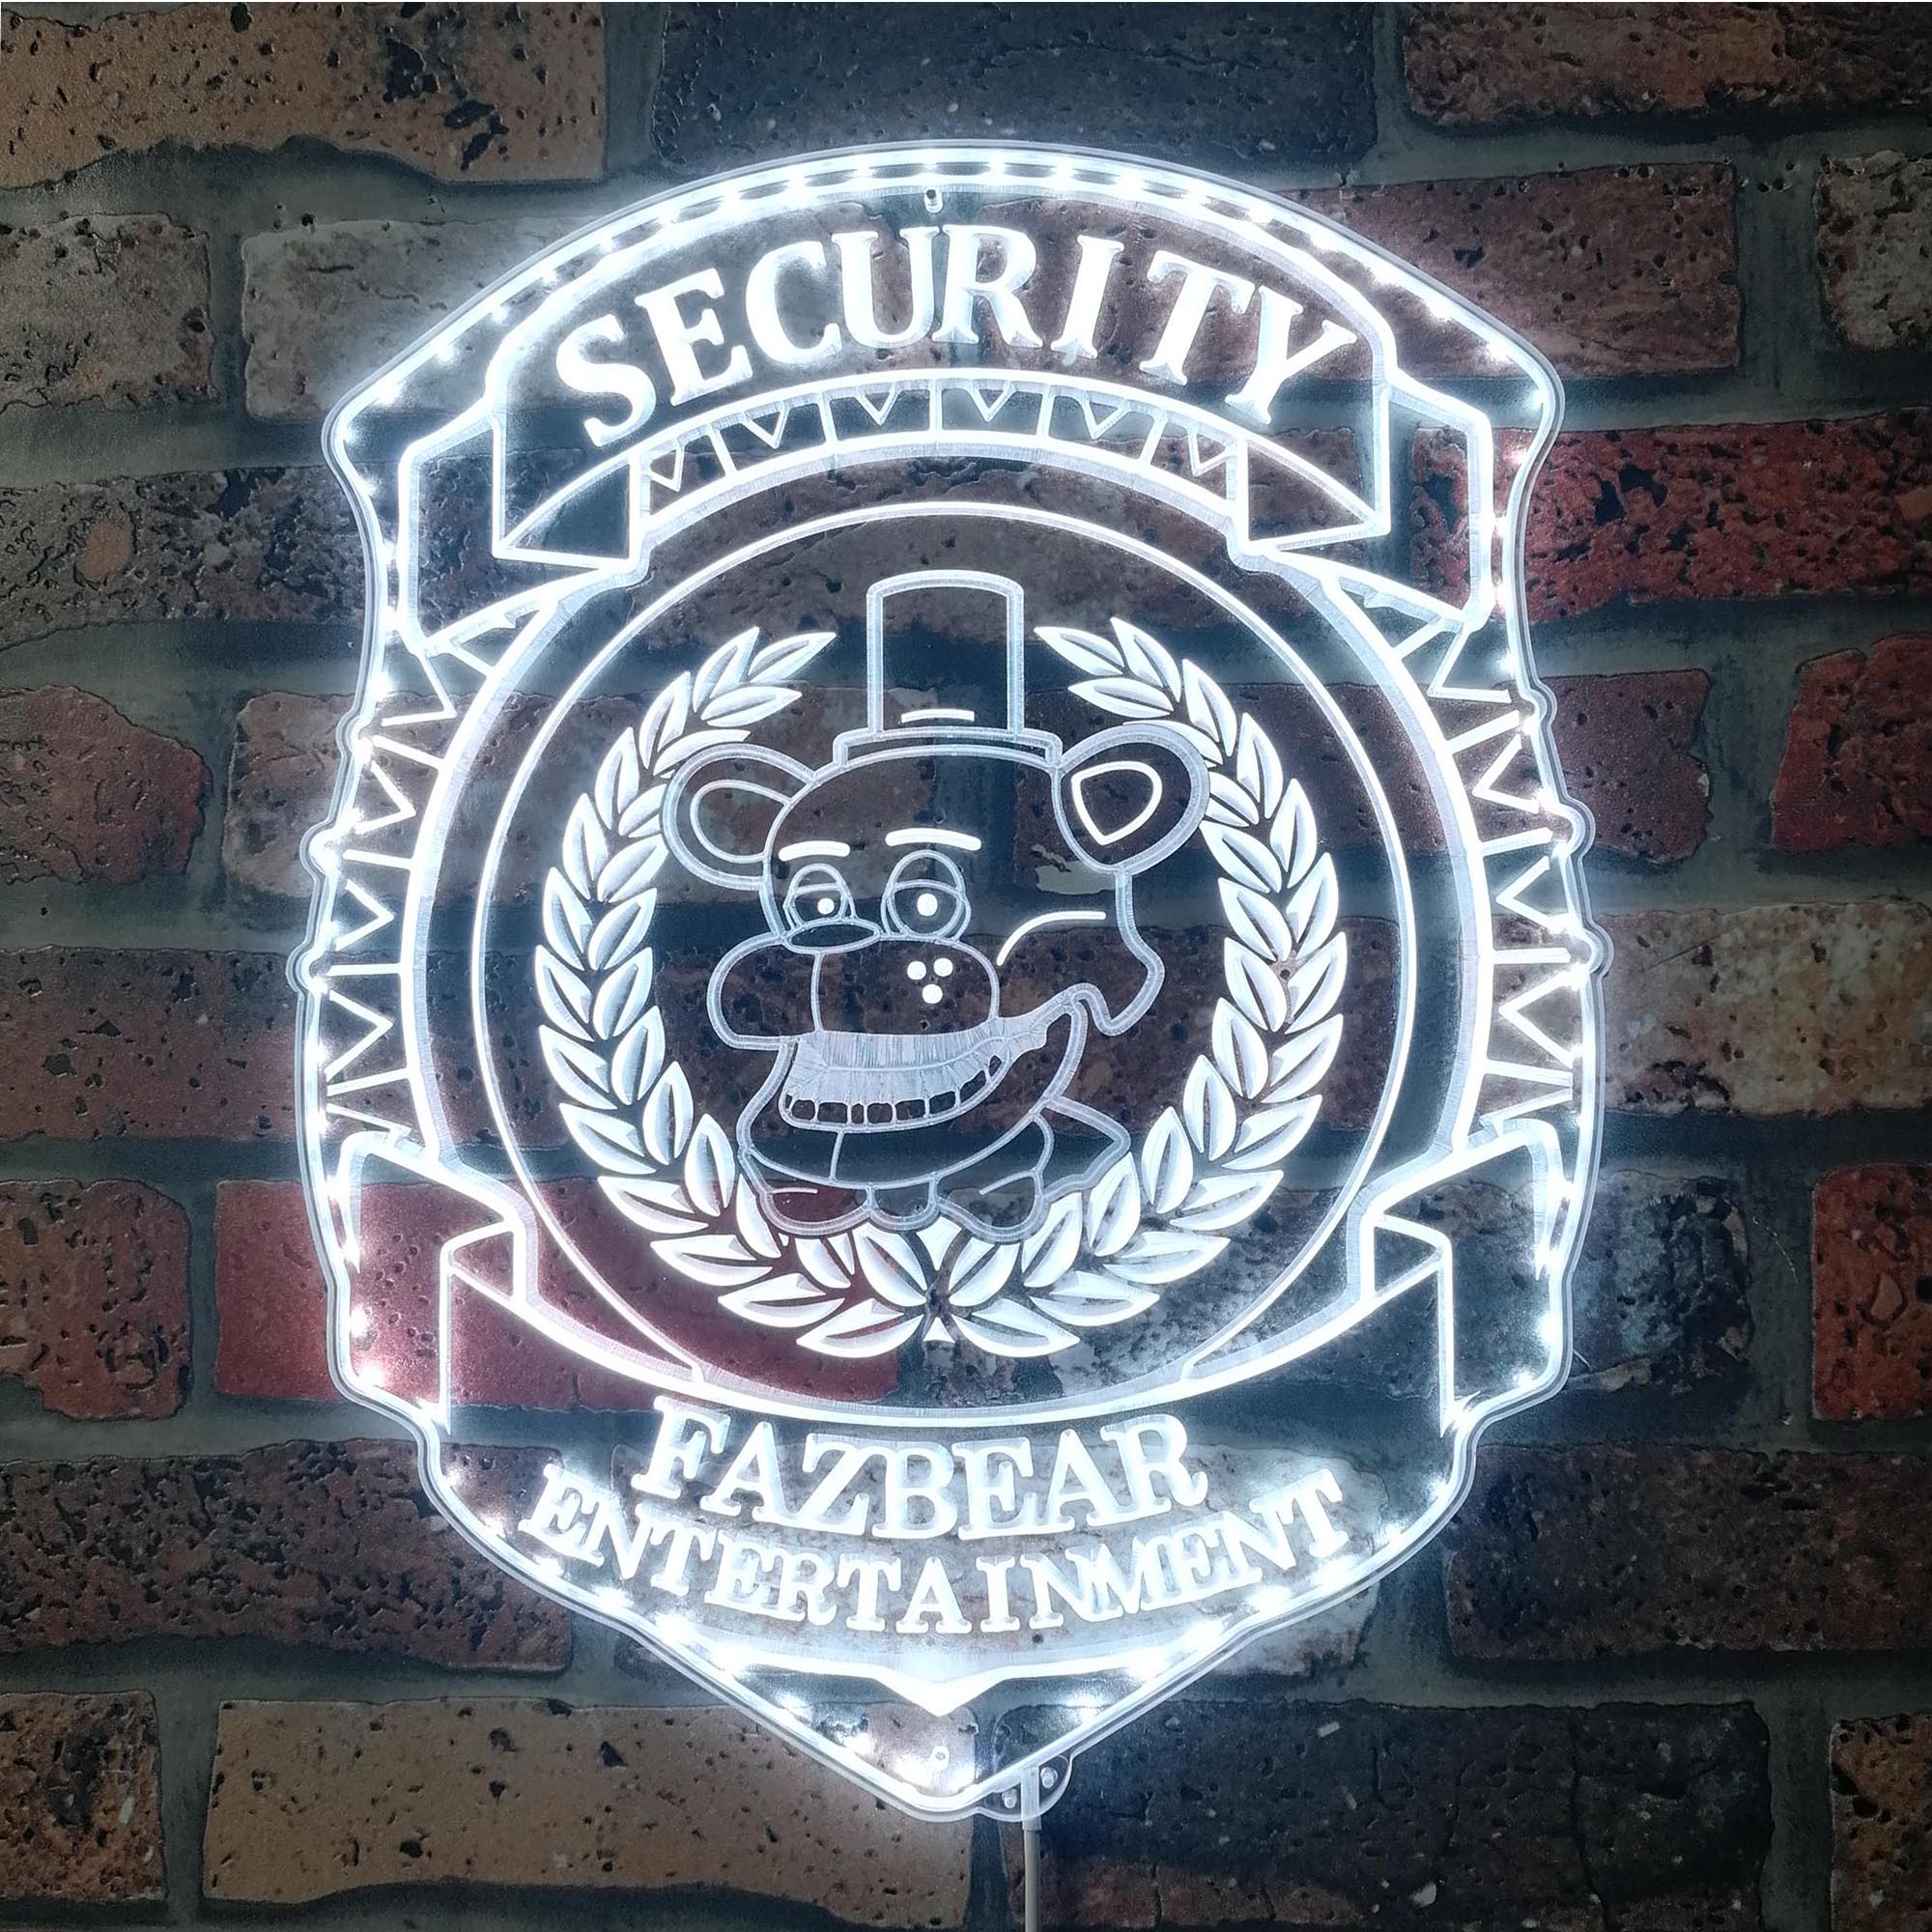 Five Nights At Freddy's Security Badge Dynamic RGB Edge Lit LED Sign